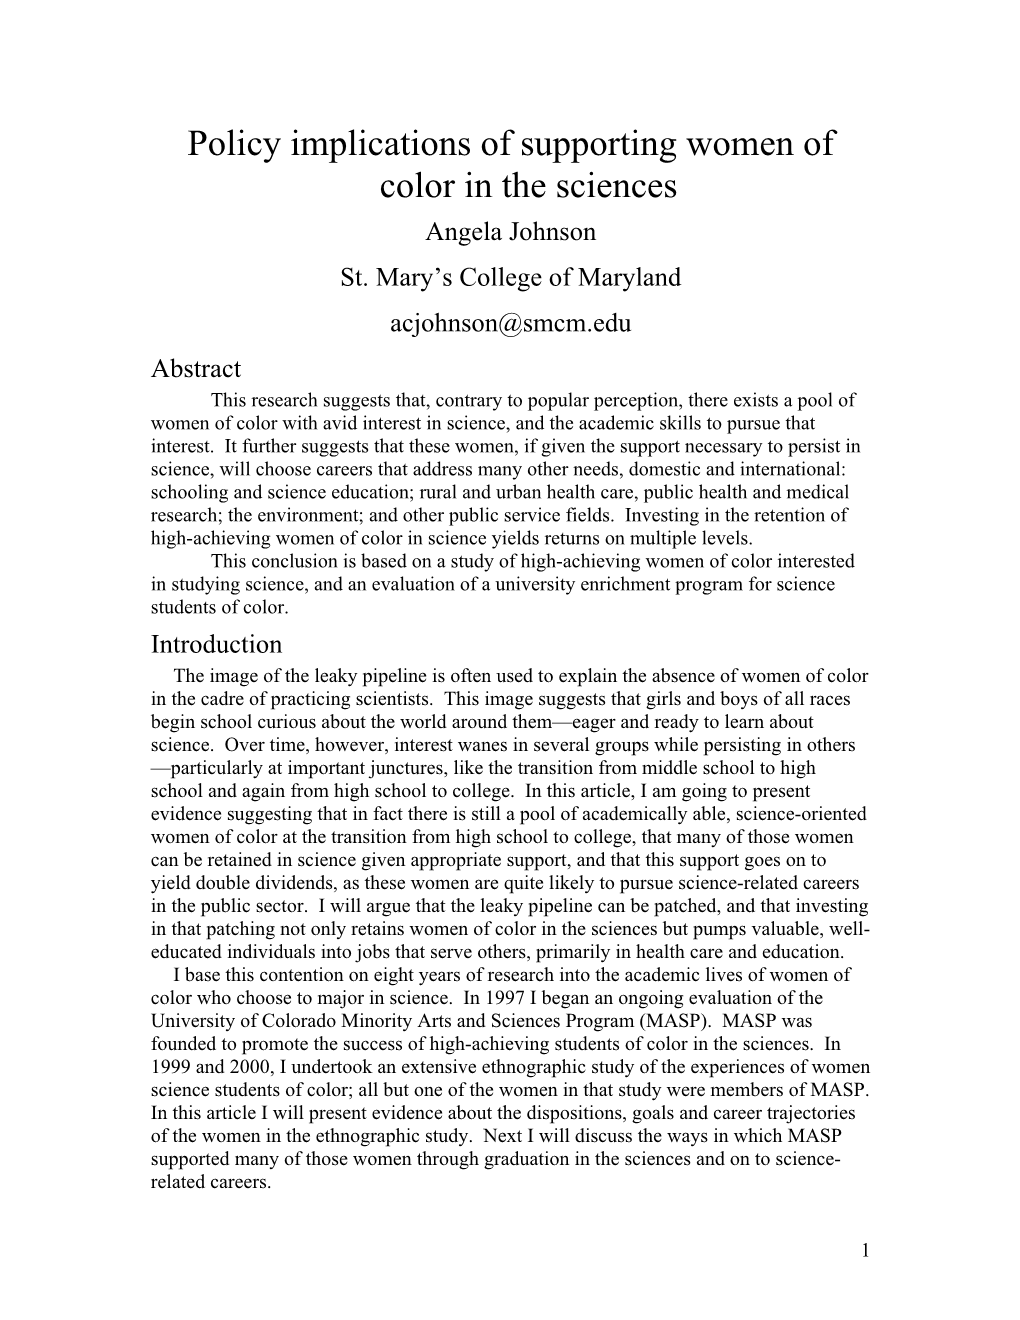 Policy Implications of Supporting Women of Color in the Sciences